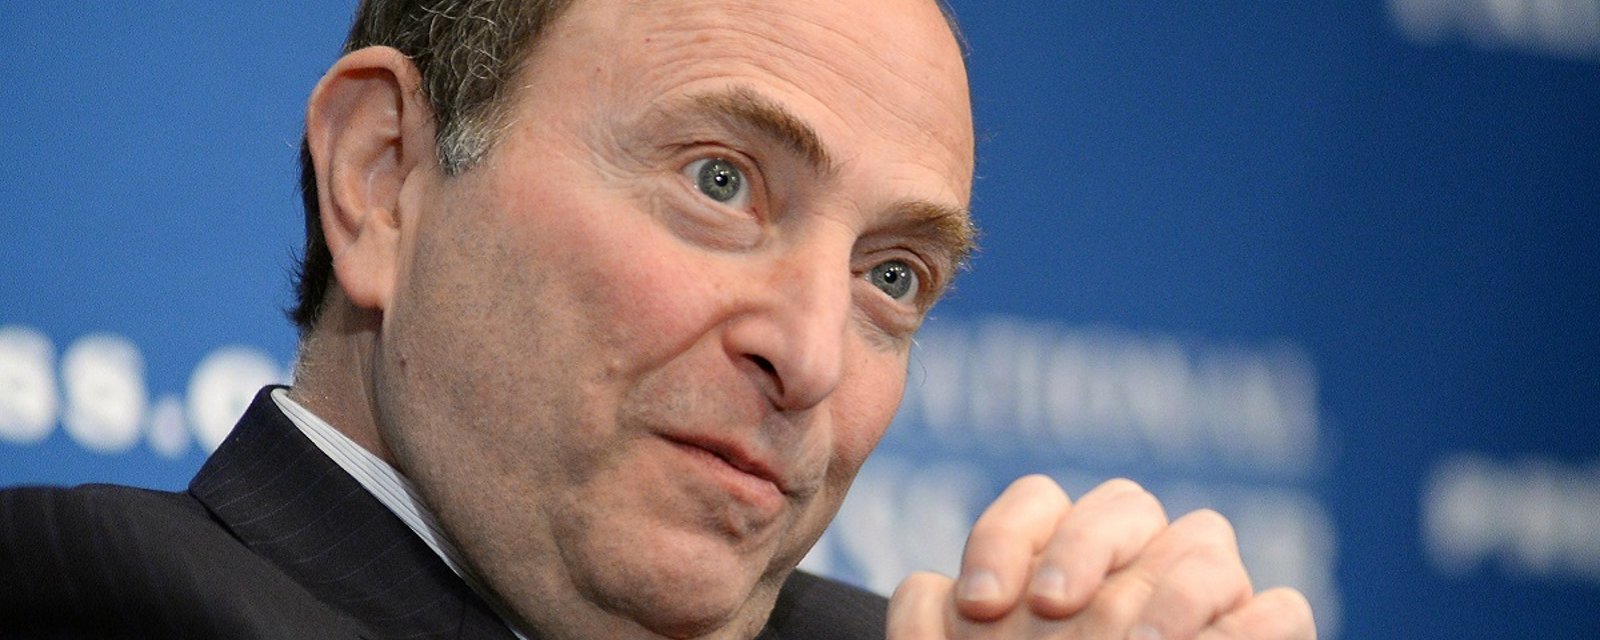 Breaking: Bettman confirms he is in talks with city Mayor to build a new NHL arena.